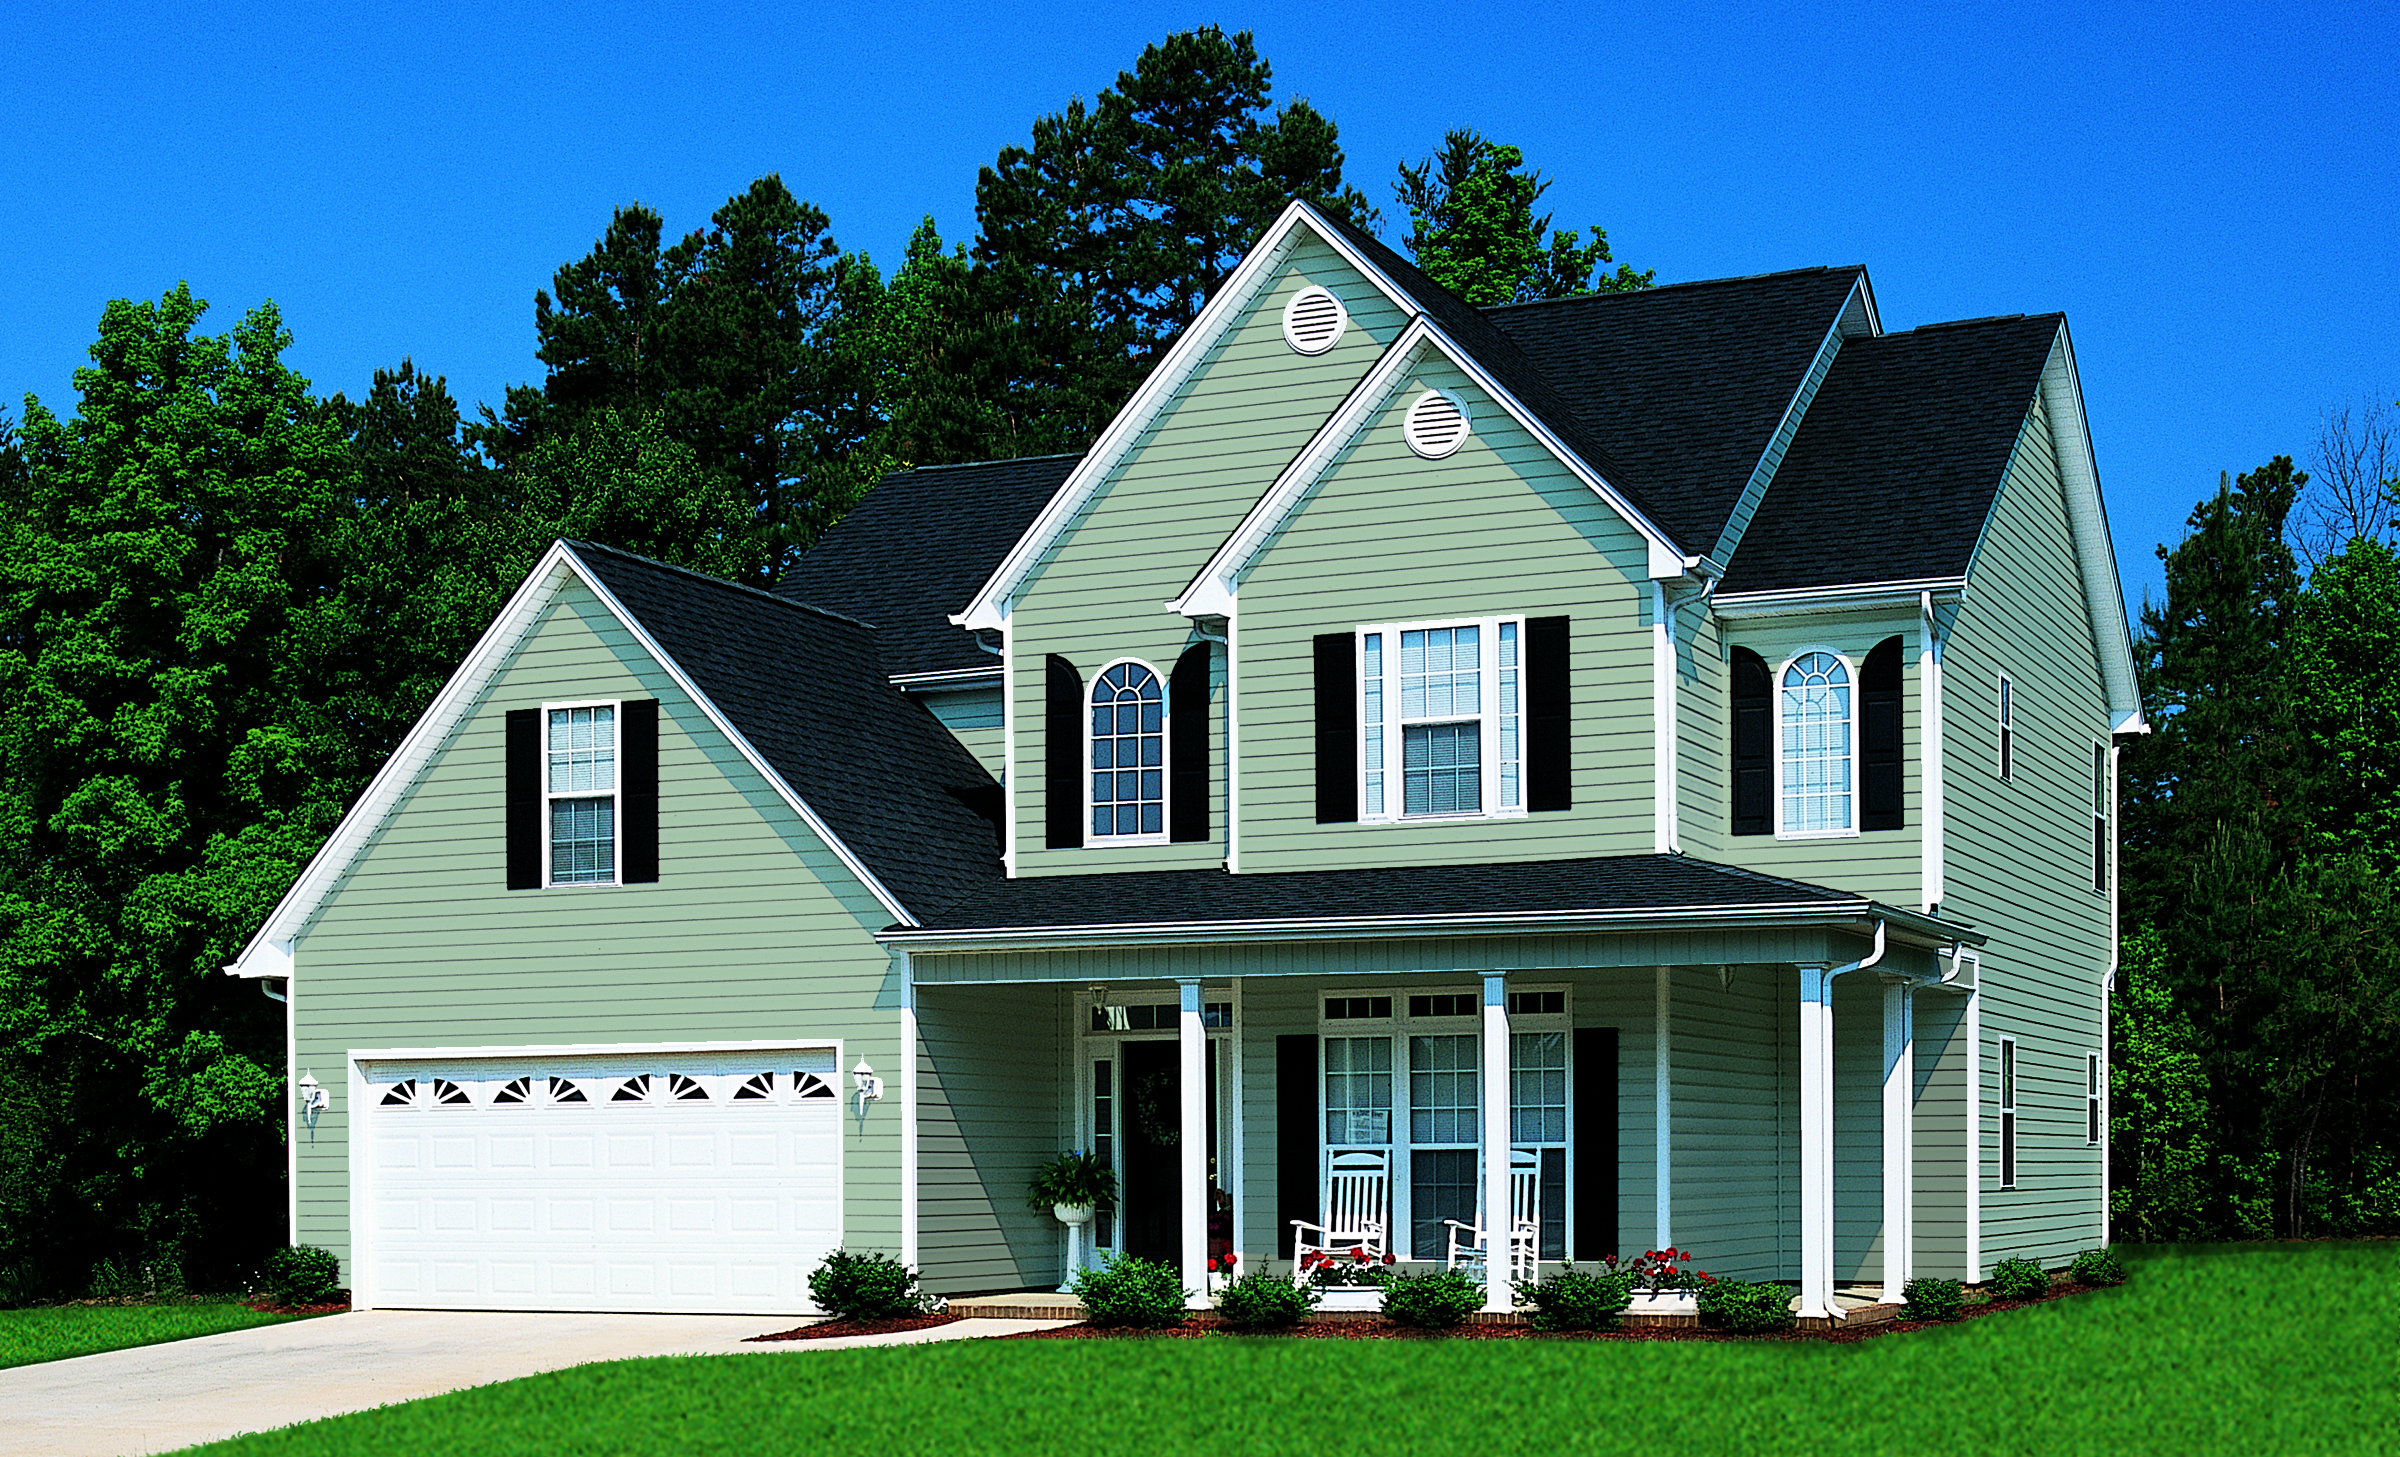 Vinyl Siding Products Available in Dove Gray